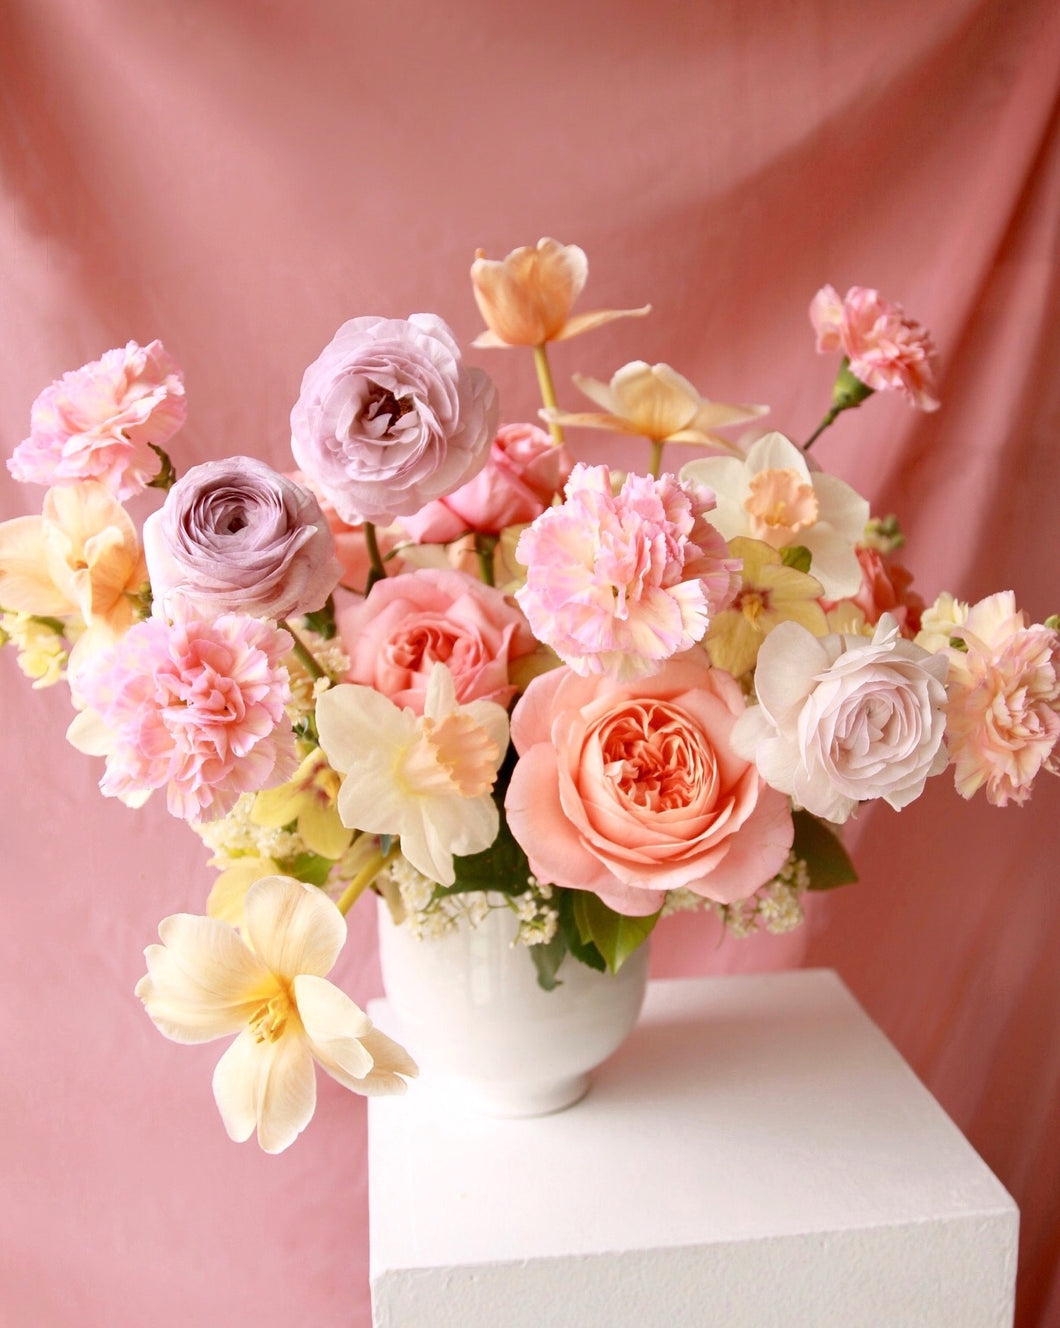 Rococo's ‘Pick of the Day’ Arrangement